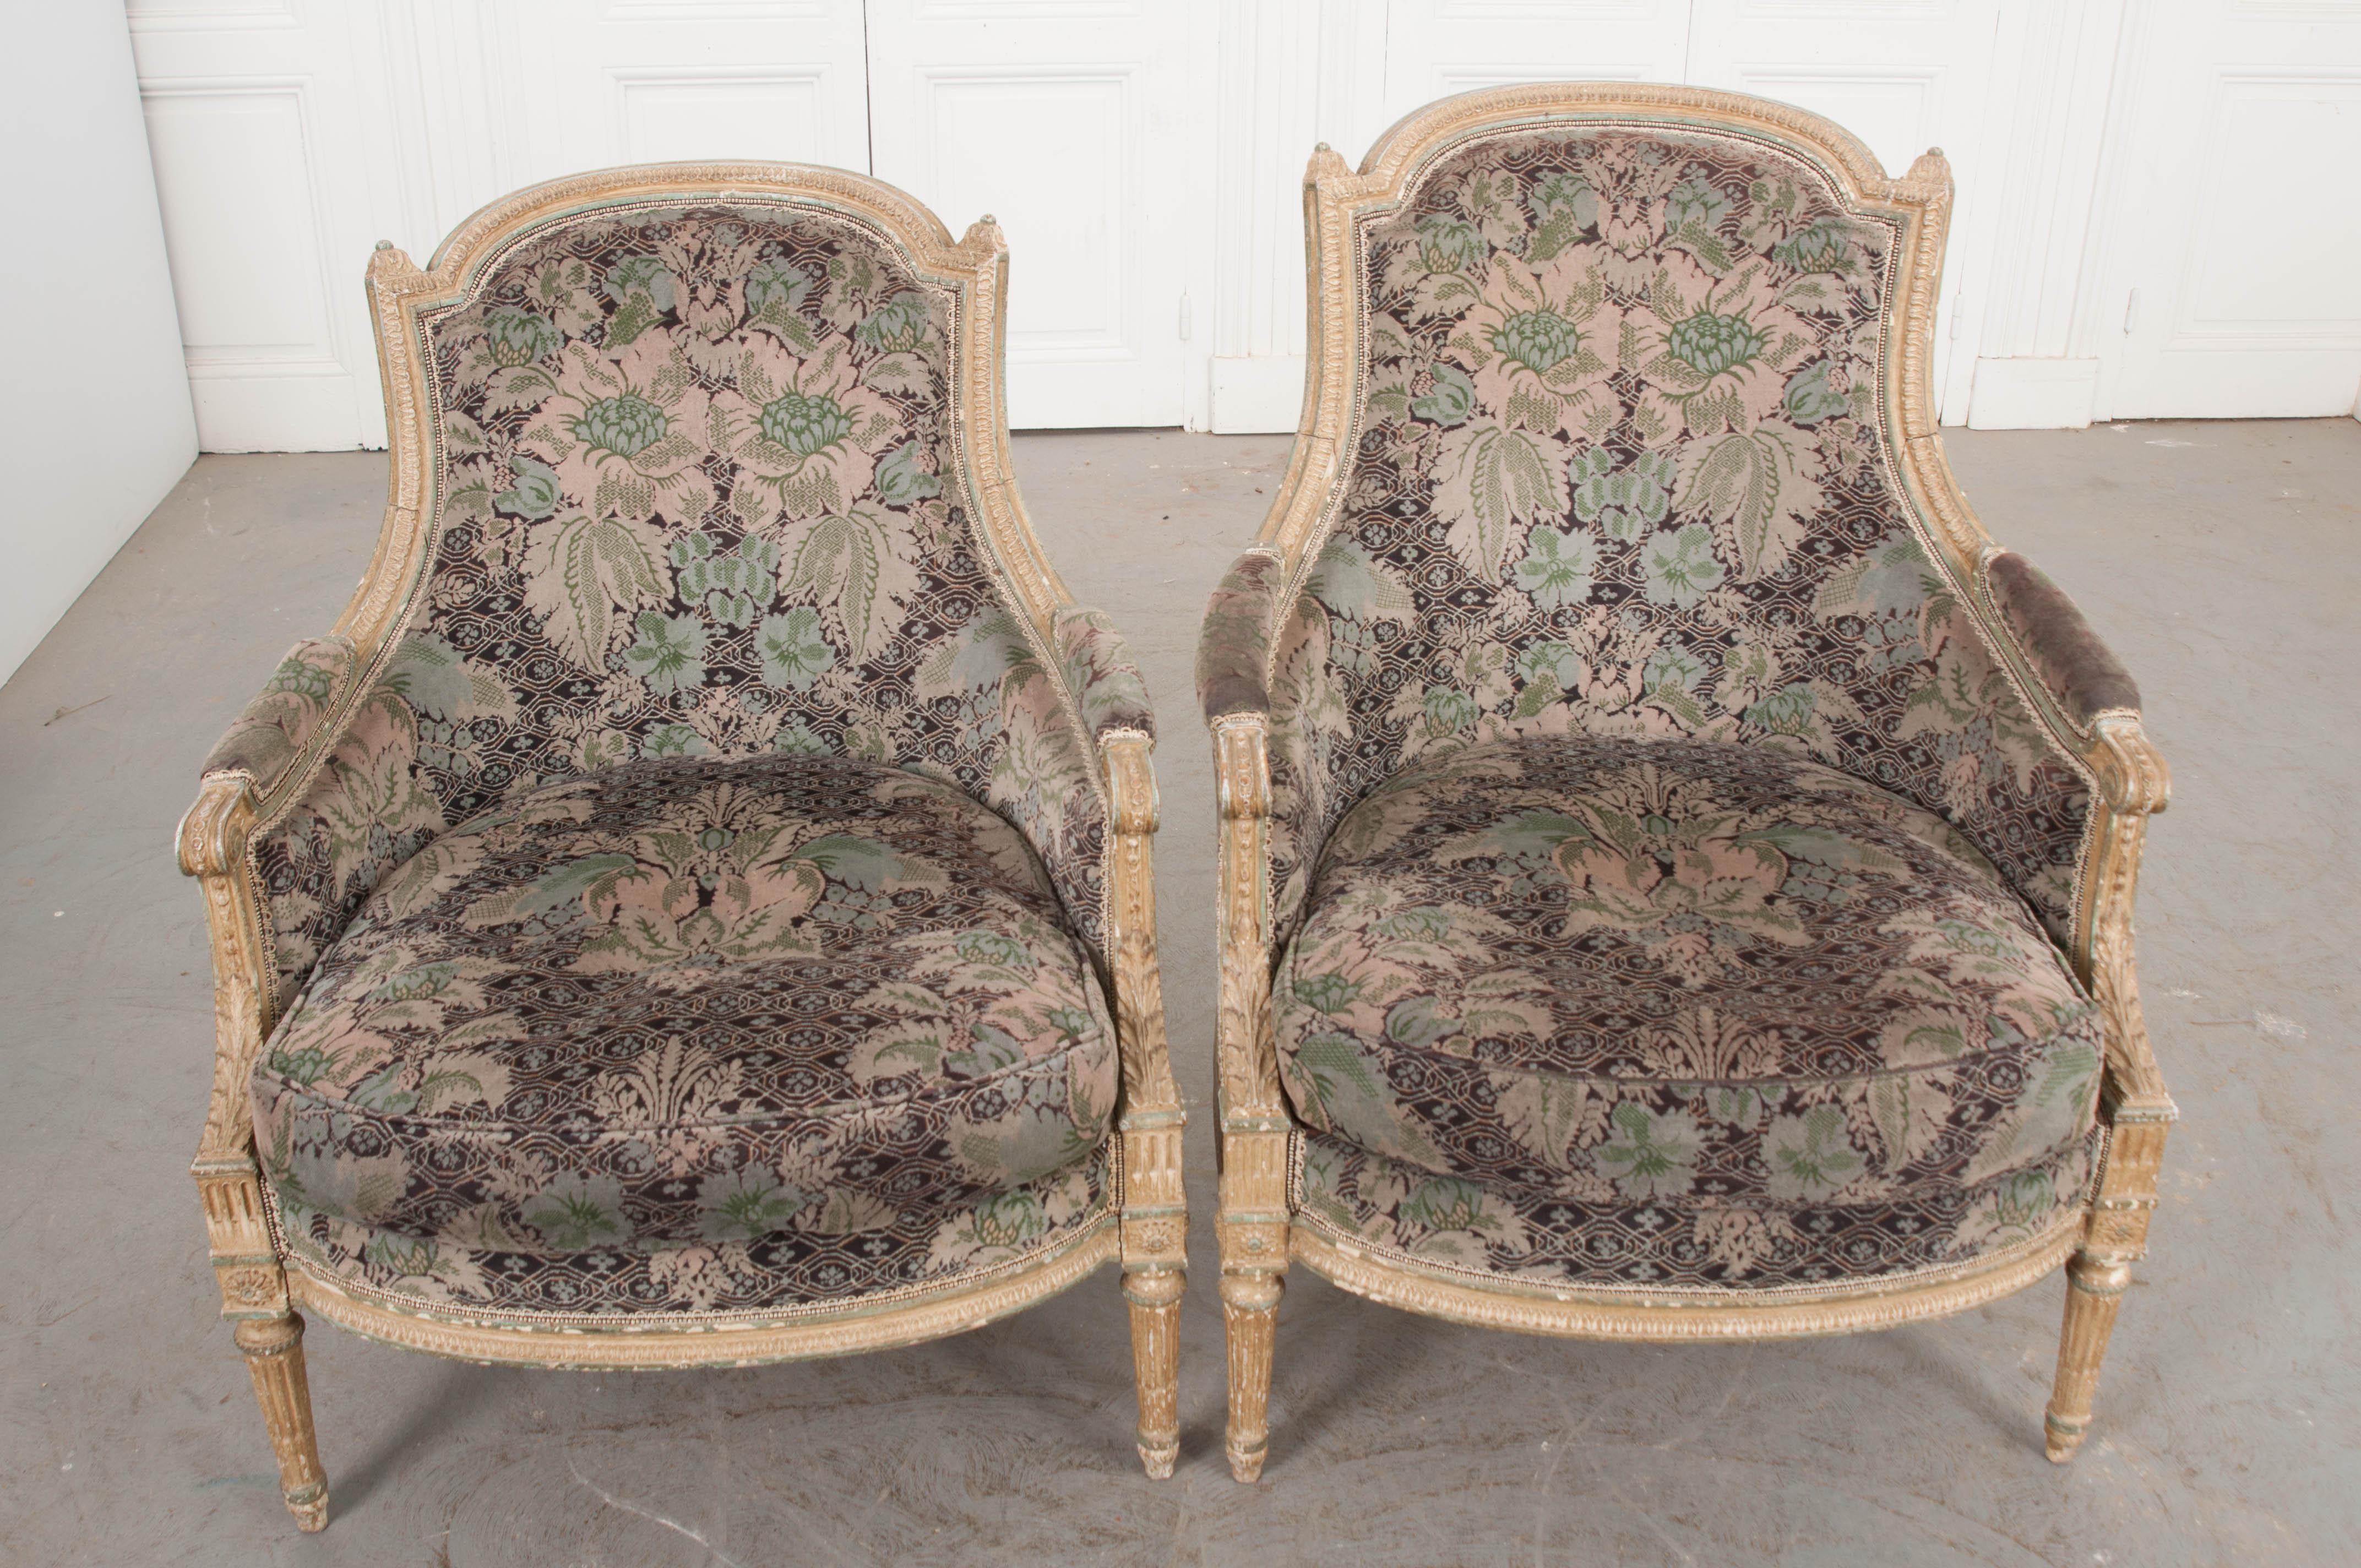 This elegant pair of Louis XVI-style cream-painted “His” and “Hers” bergères, circa 1860s, are from France and feature gorgeous velvet floral upholstery in shades of aubergine, lavender, grey, and green. The painted frames are highlighted in a sage